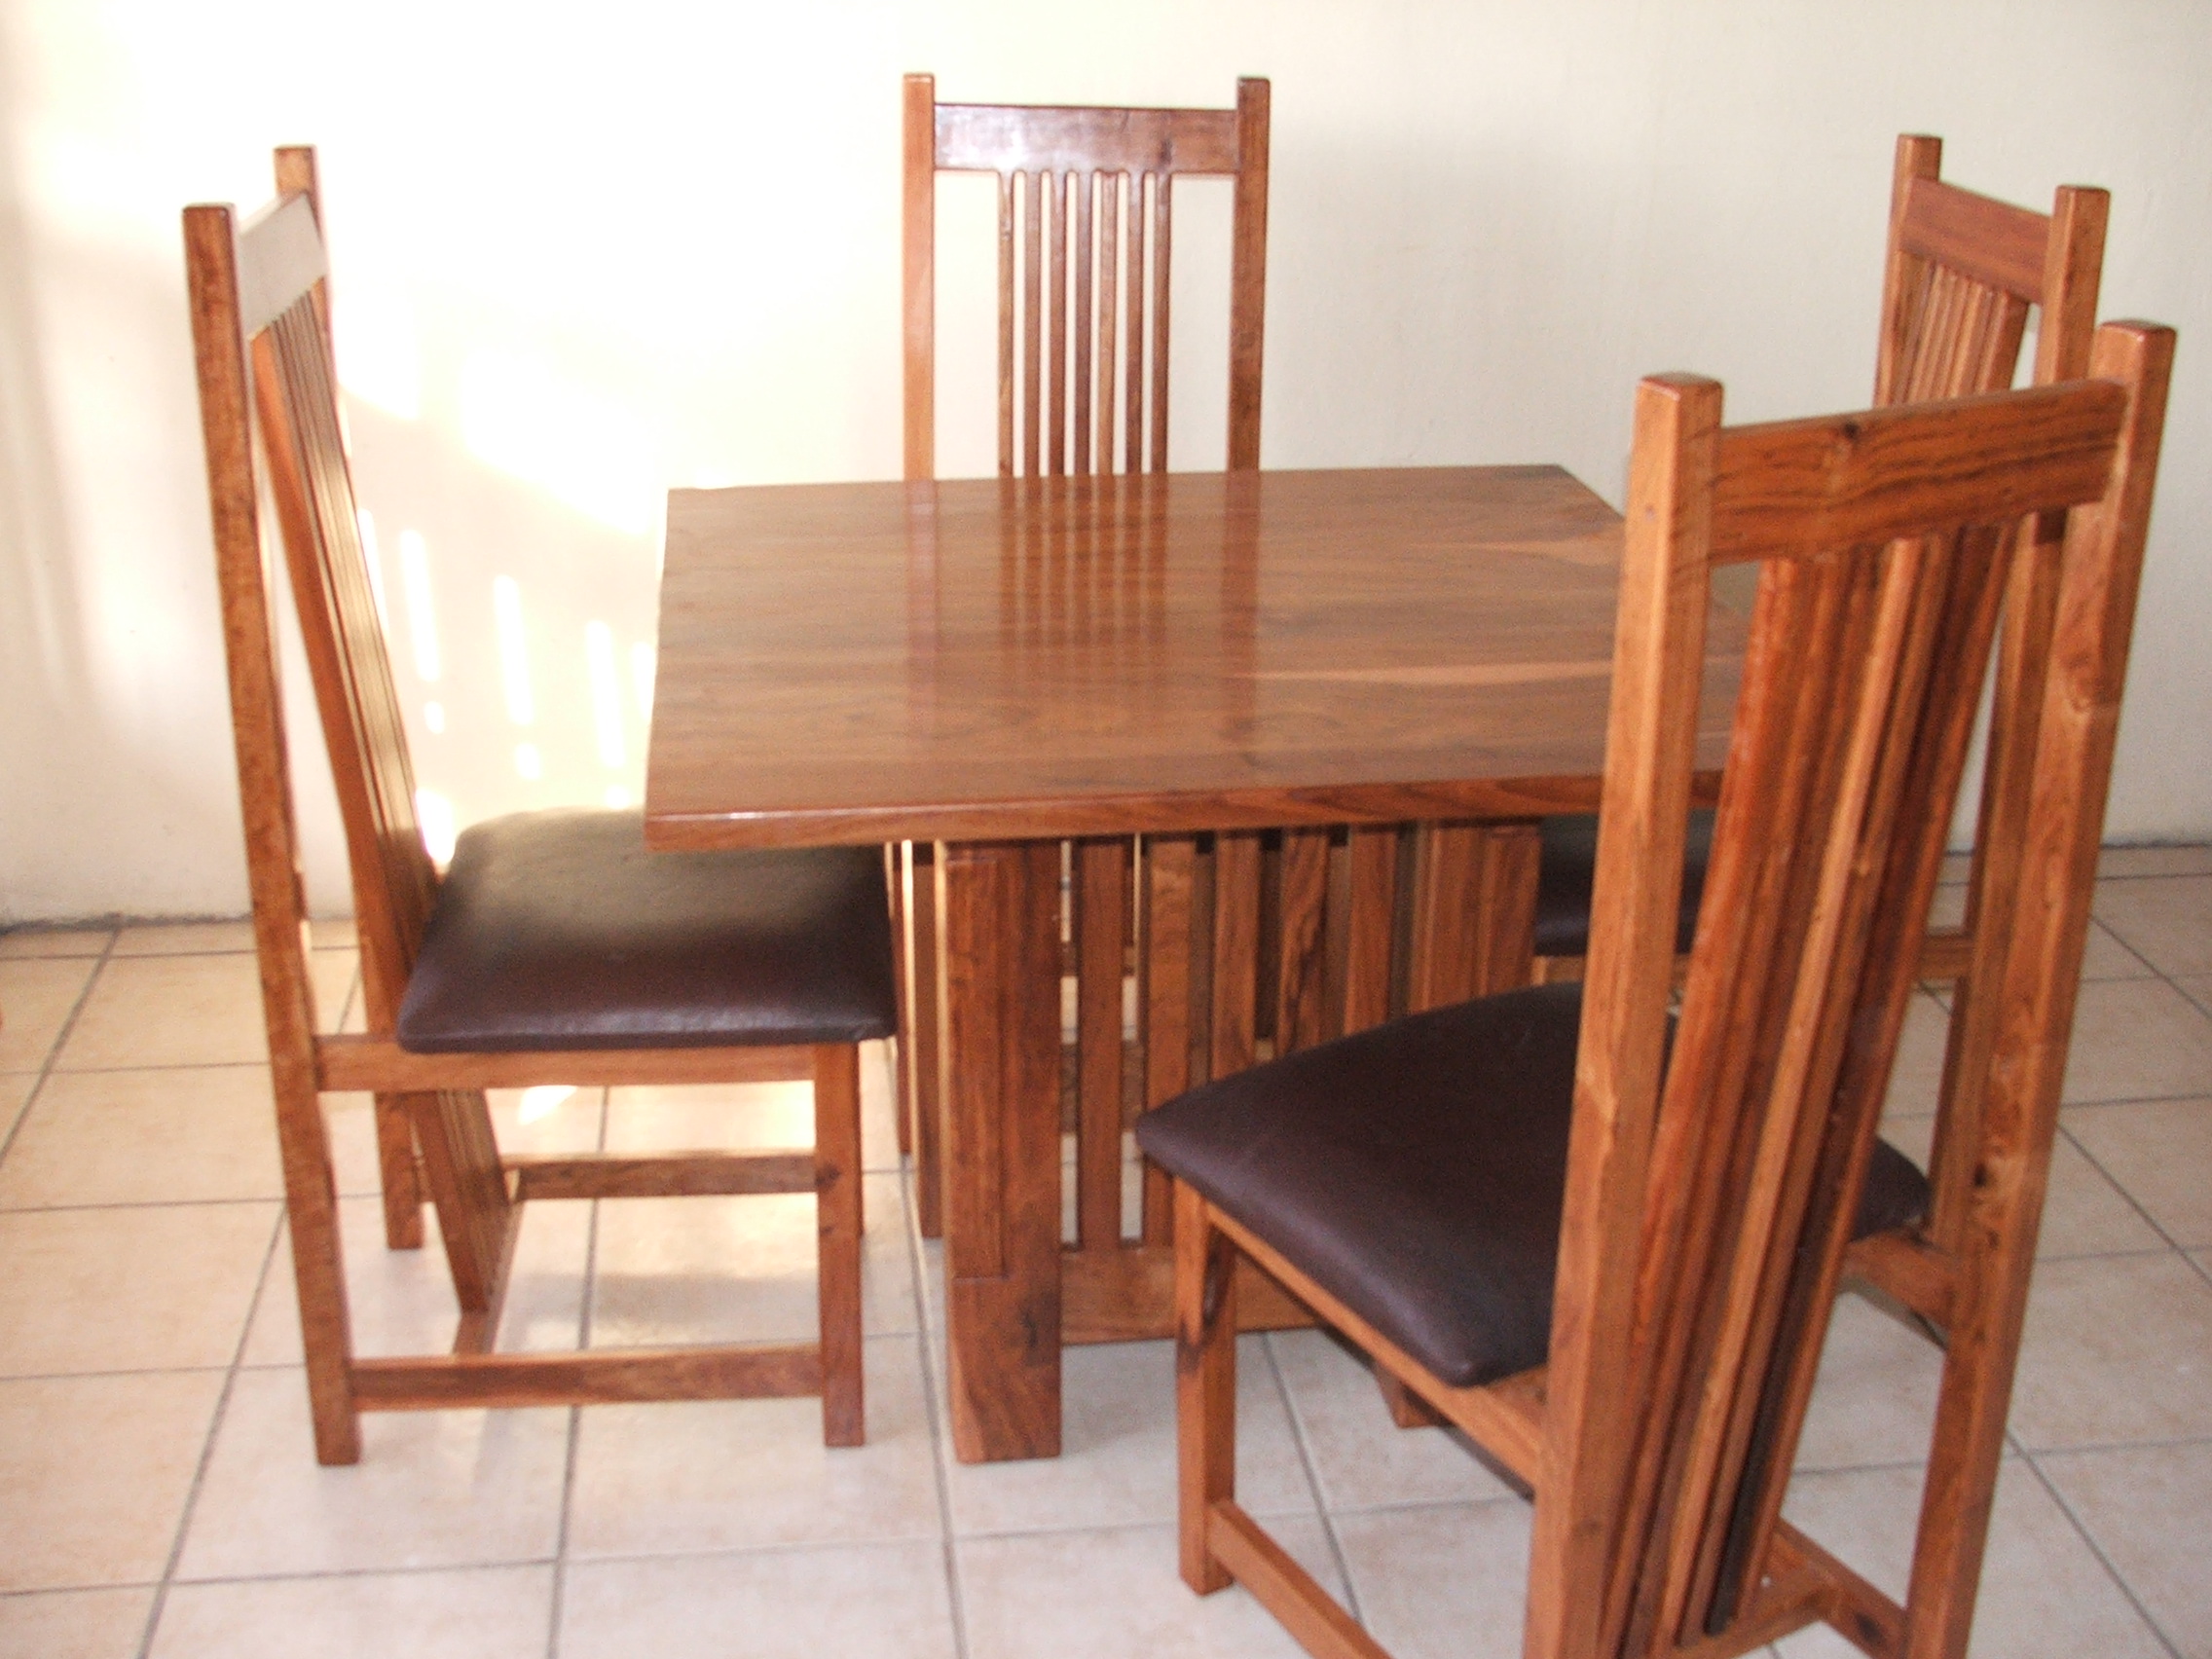 Teak Furniture Distributor: Bringing Traditional And Modern Designs To Your Home